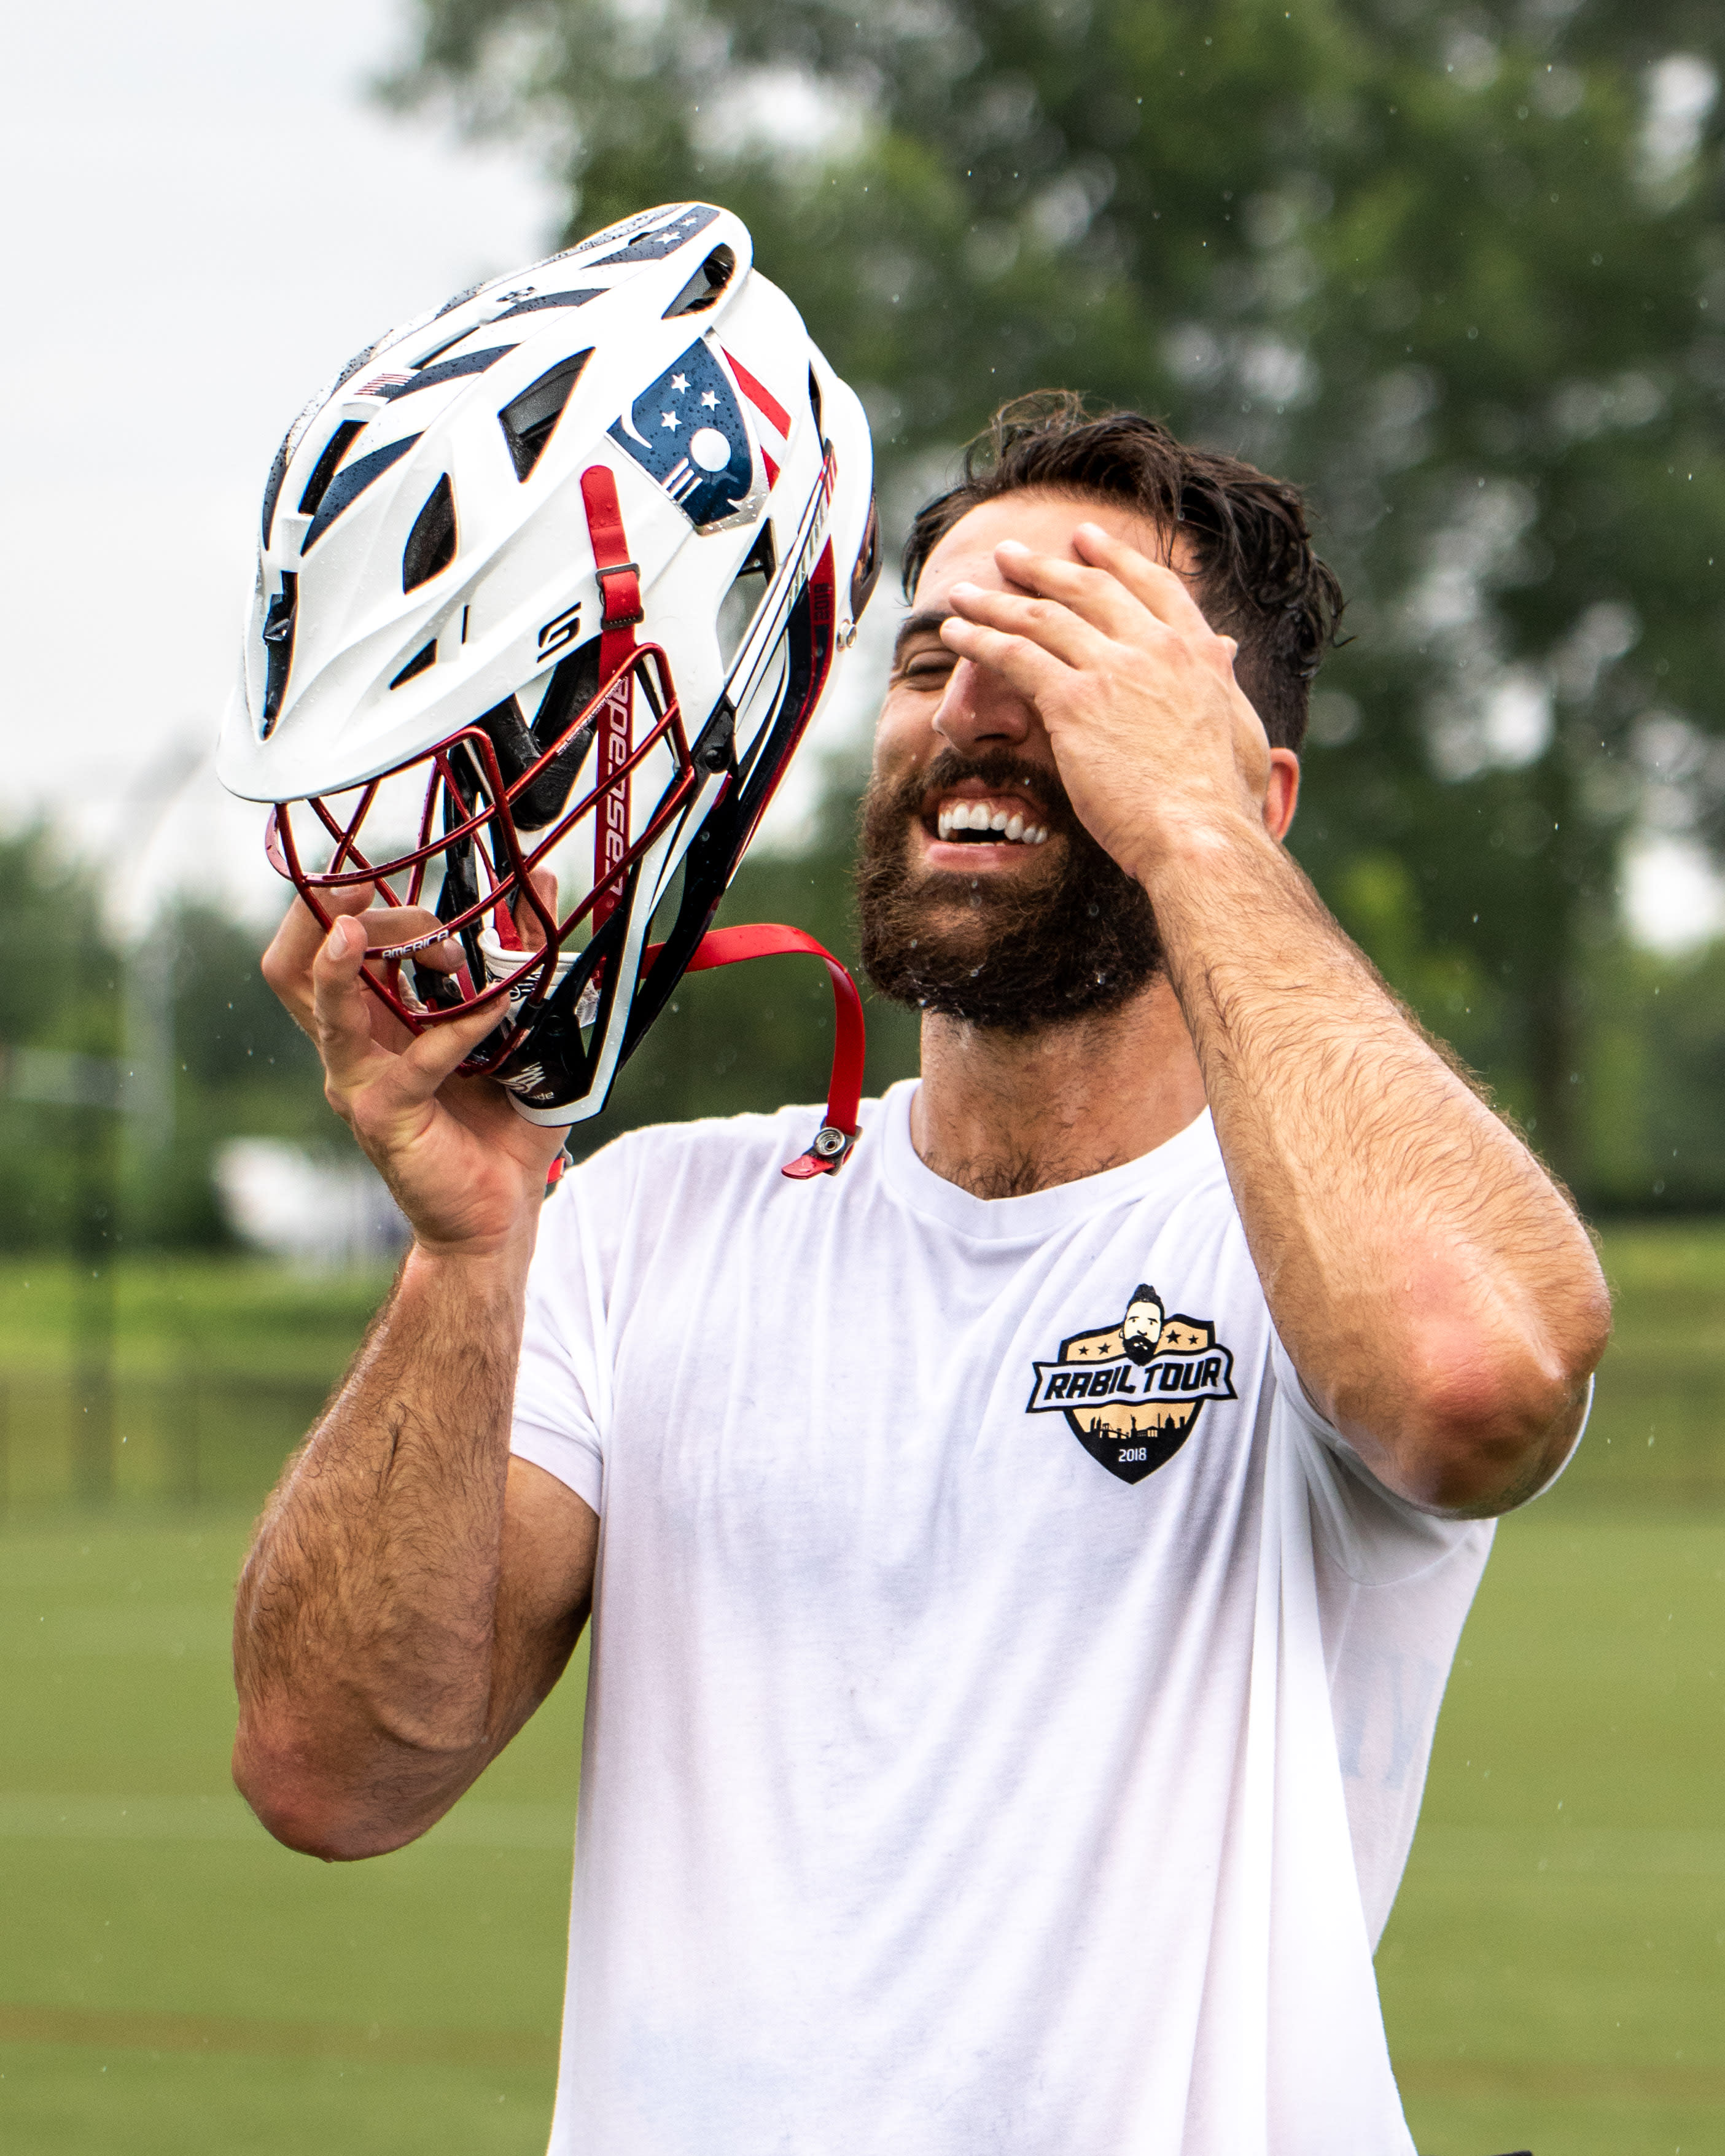 Premier Lacrosse League on X: .@PaulRabil signed a limited amount of  @PLLAtlas jerseys for Cyber Monday. Secure yours HERE:    / X